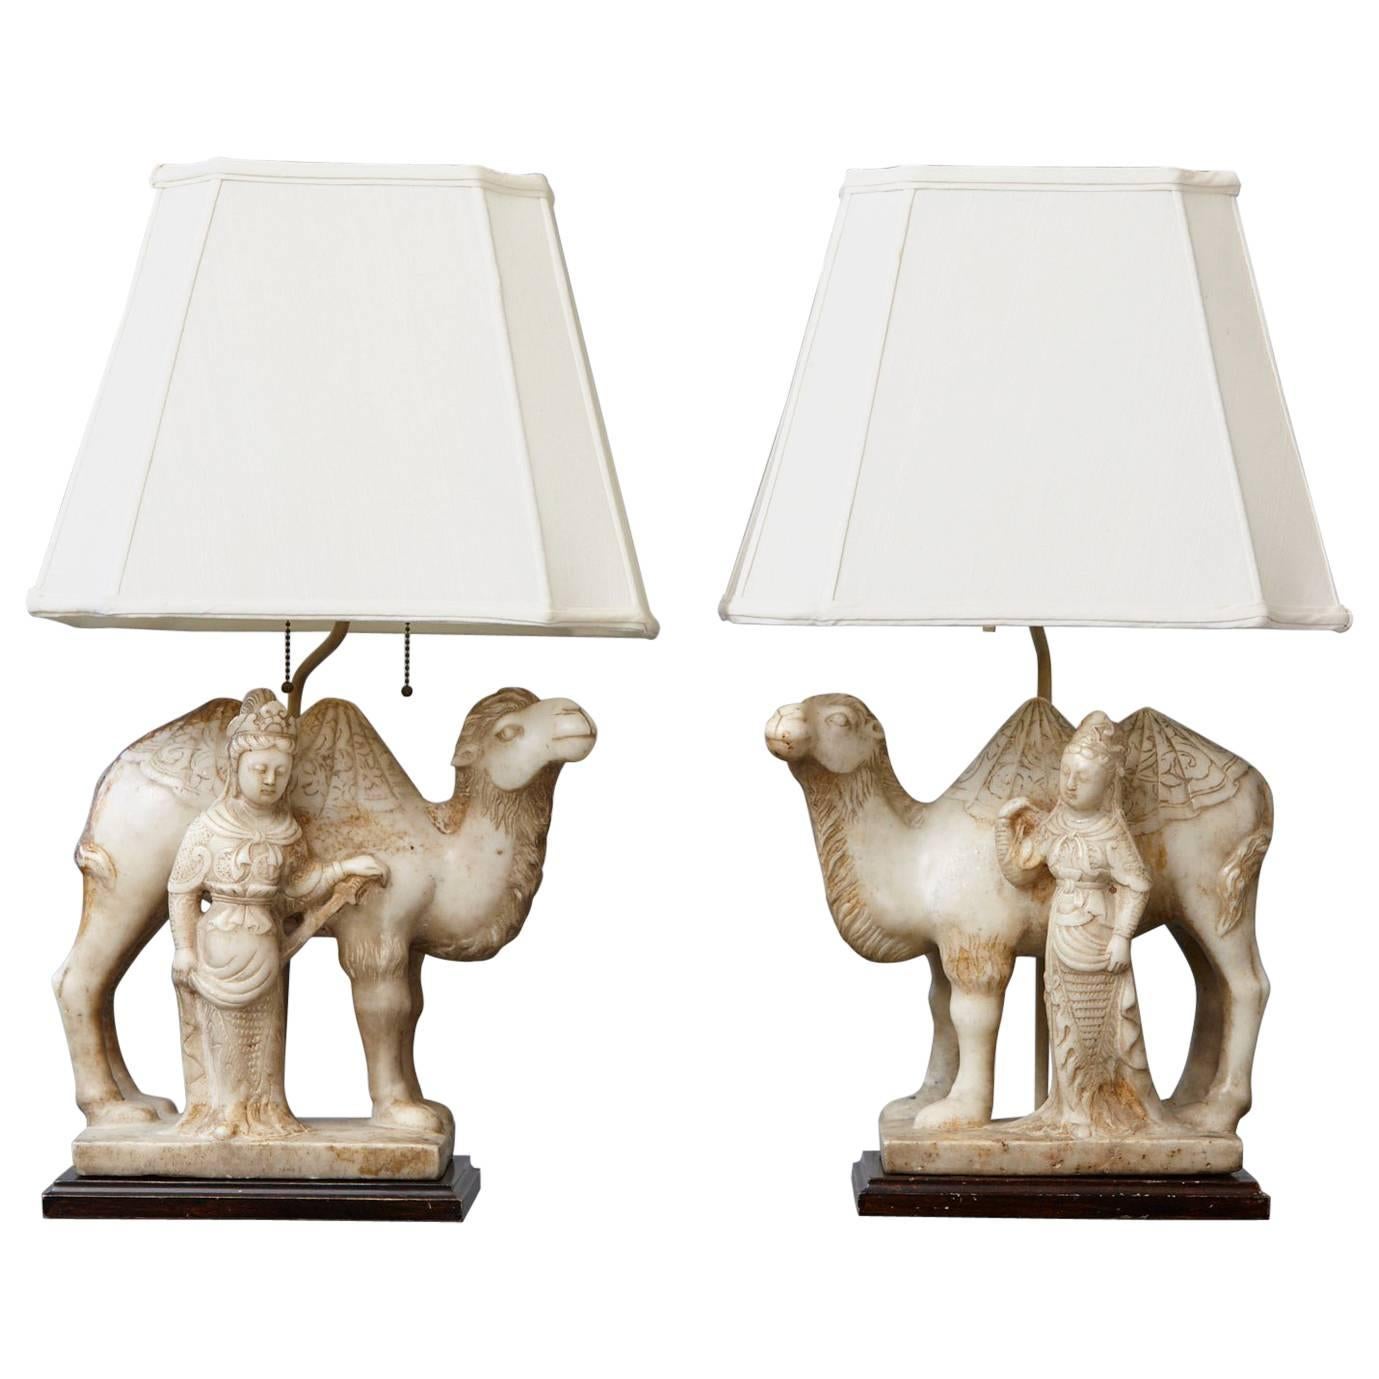 Pair of Hand-Carved Figurative Marble Table Lamps